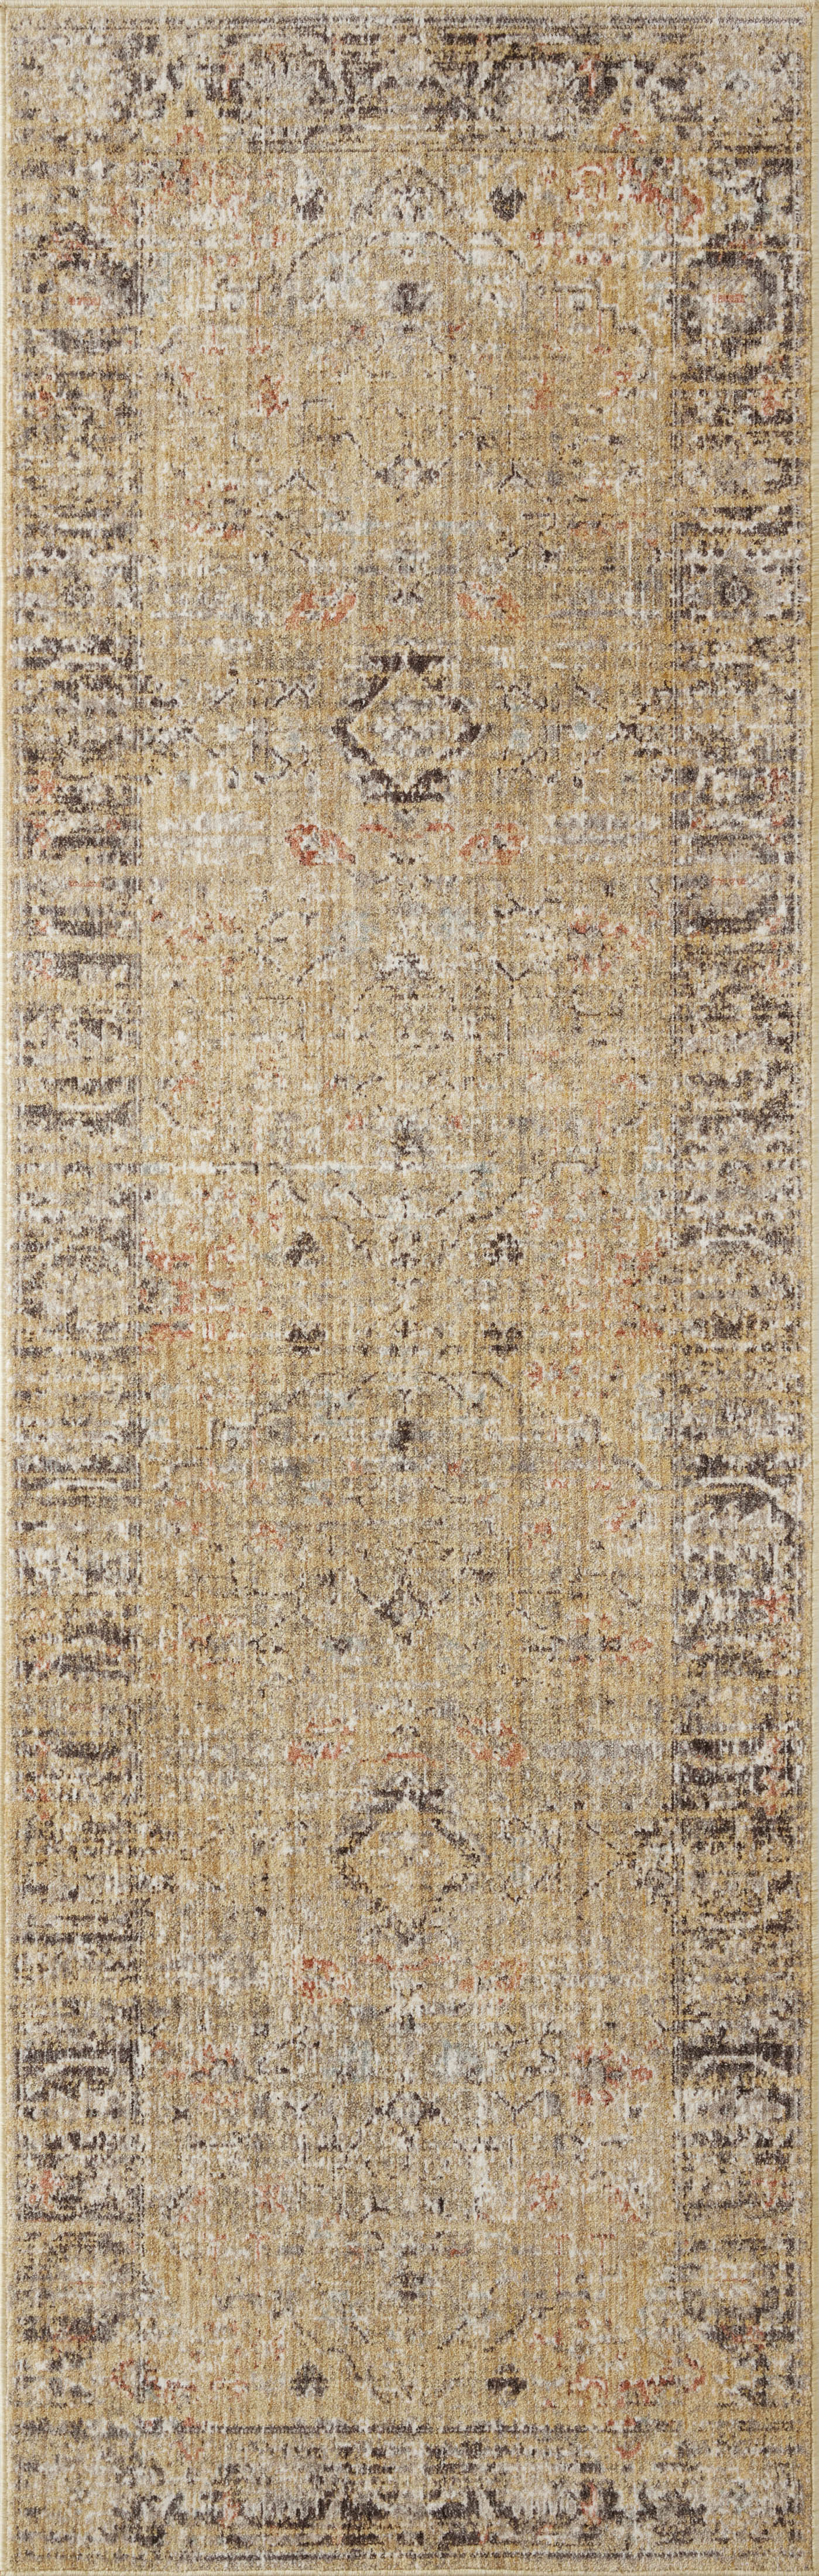 Loloi Millie Rug Collection - Gold / Charcoal - Magnolia Home by Joanna Gaines-Blue Hand Home